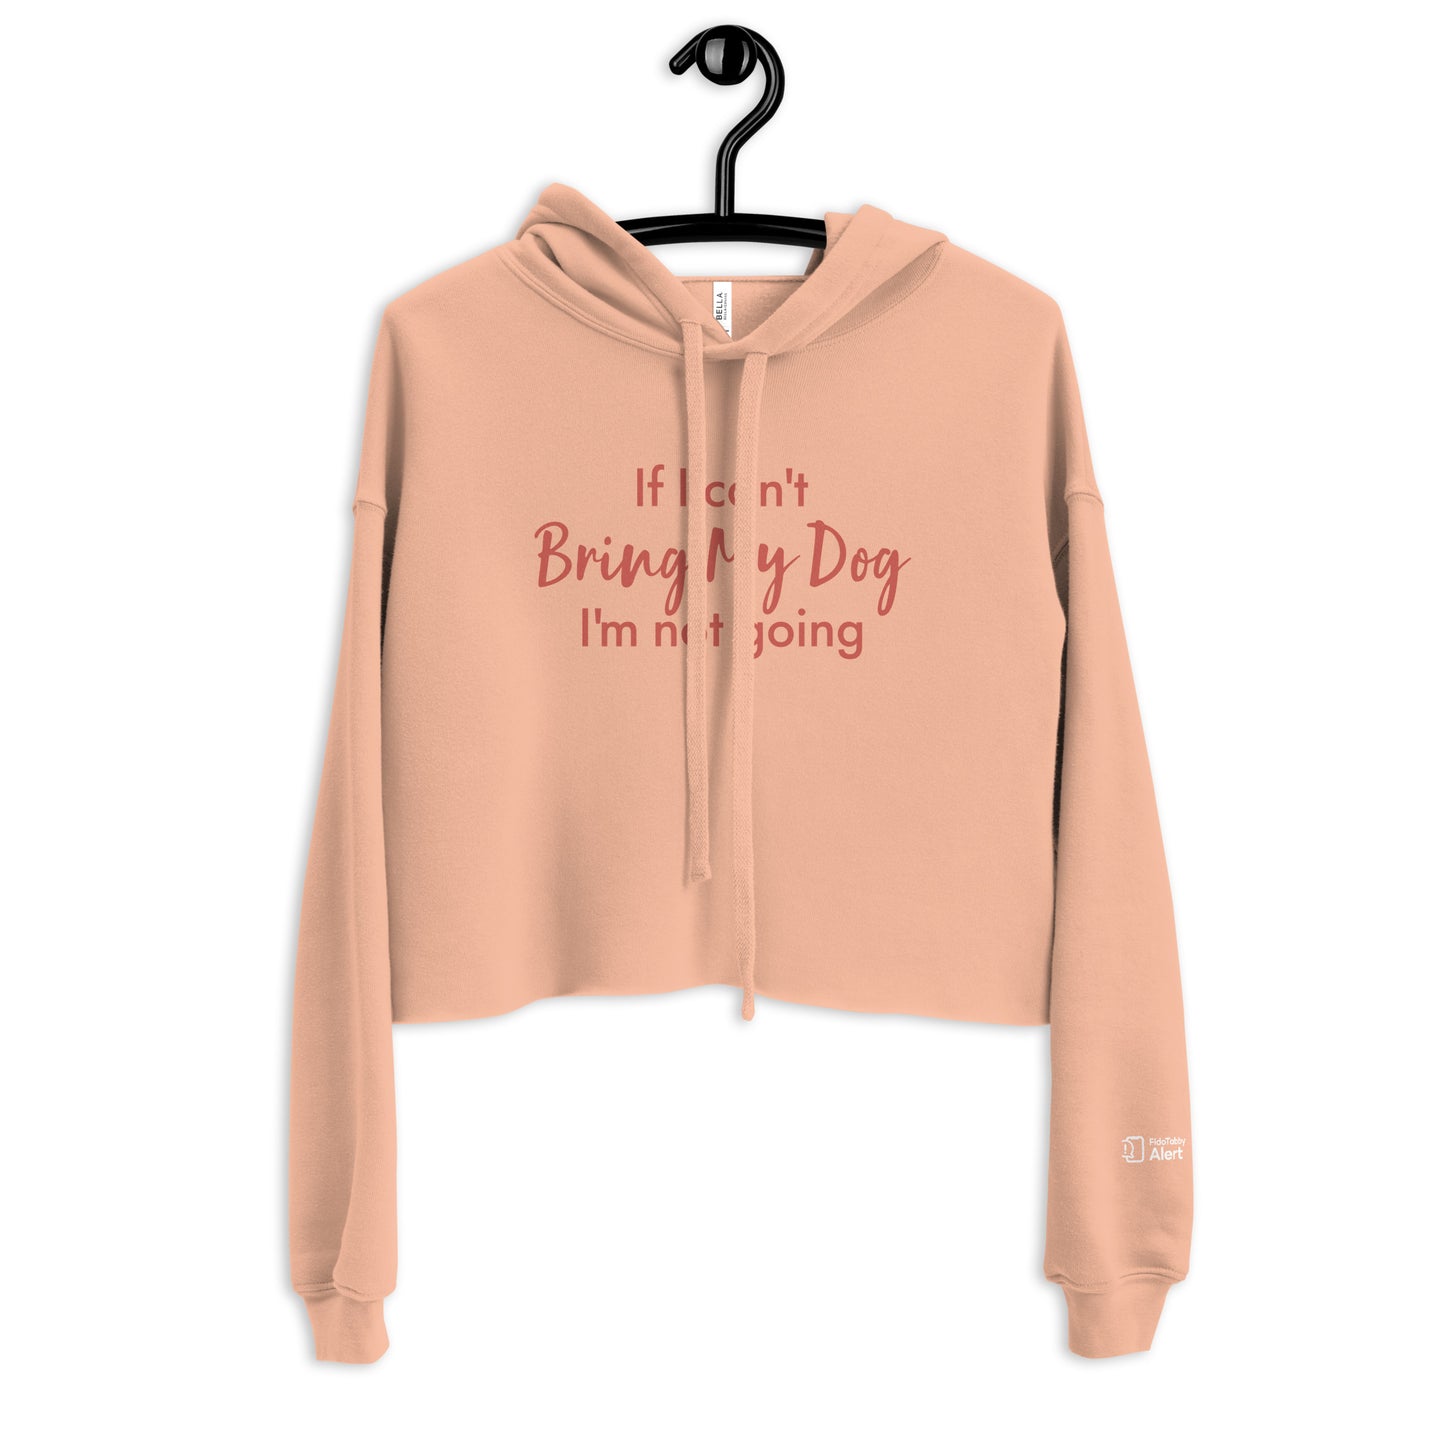 I'm Not Going - Cropped Hoodie